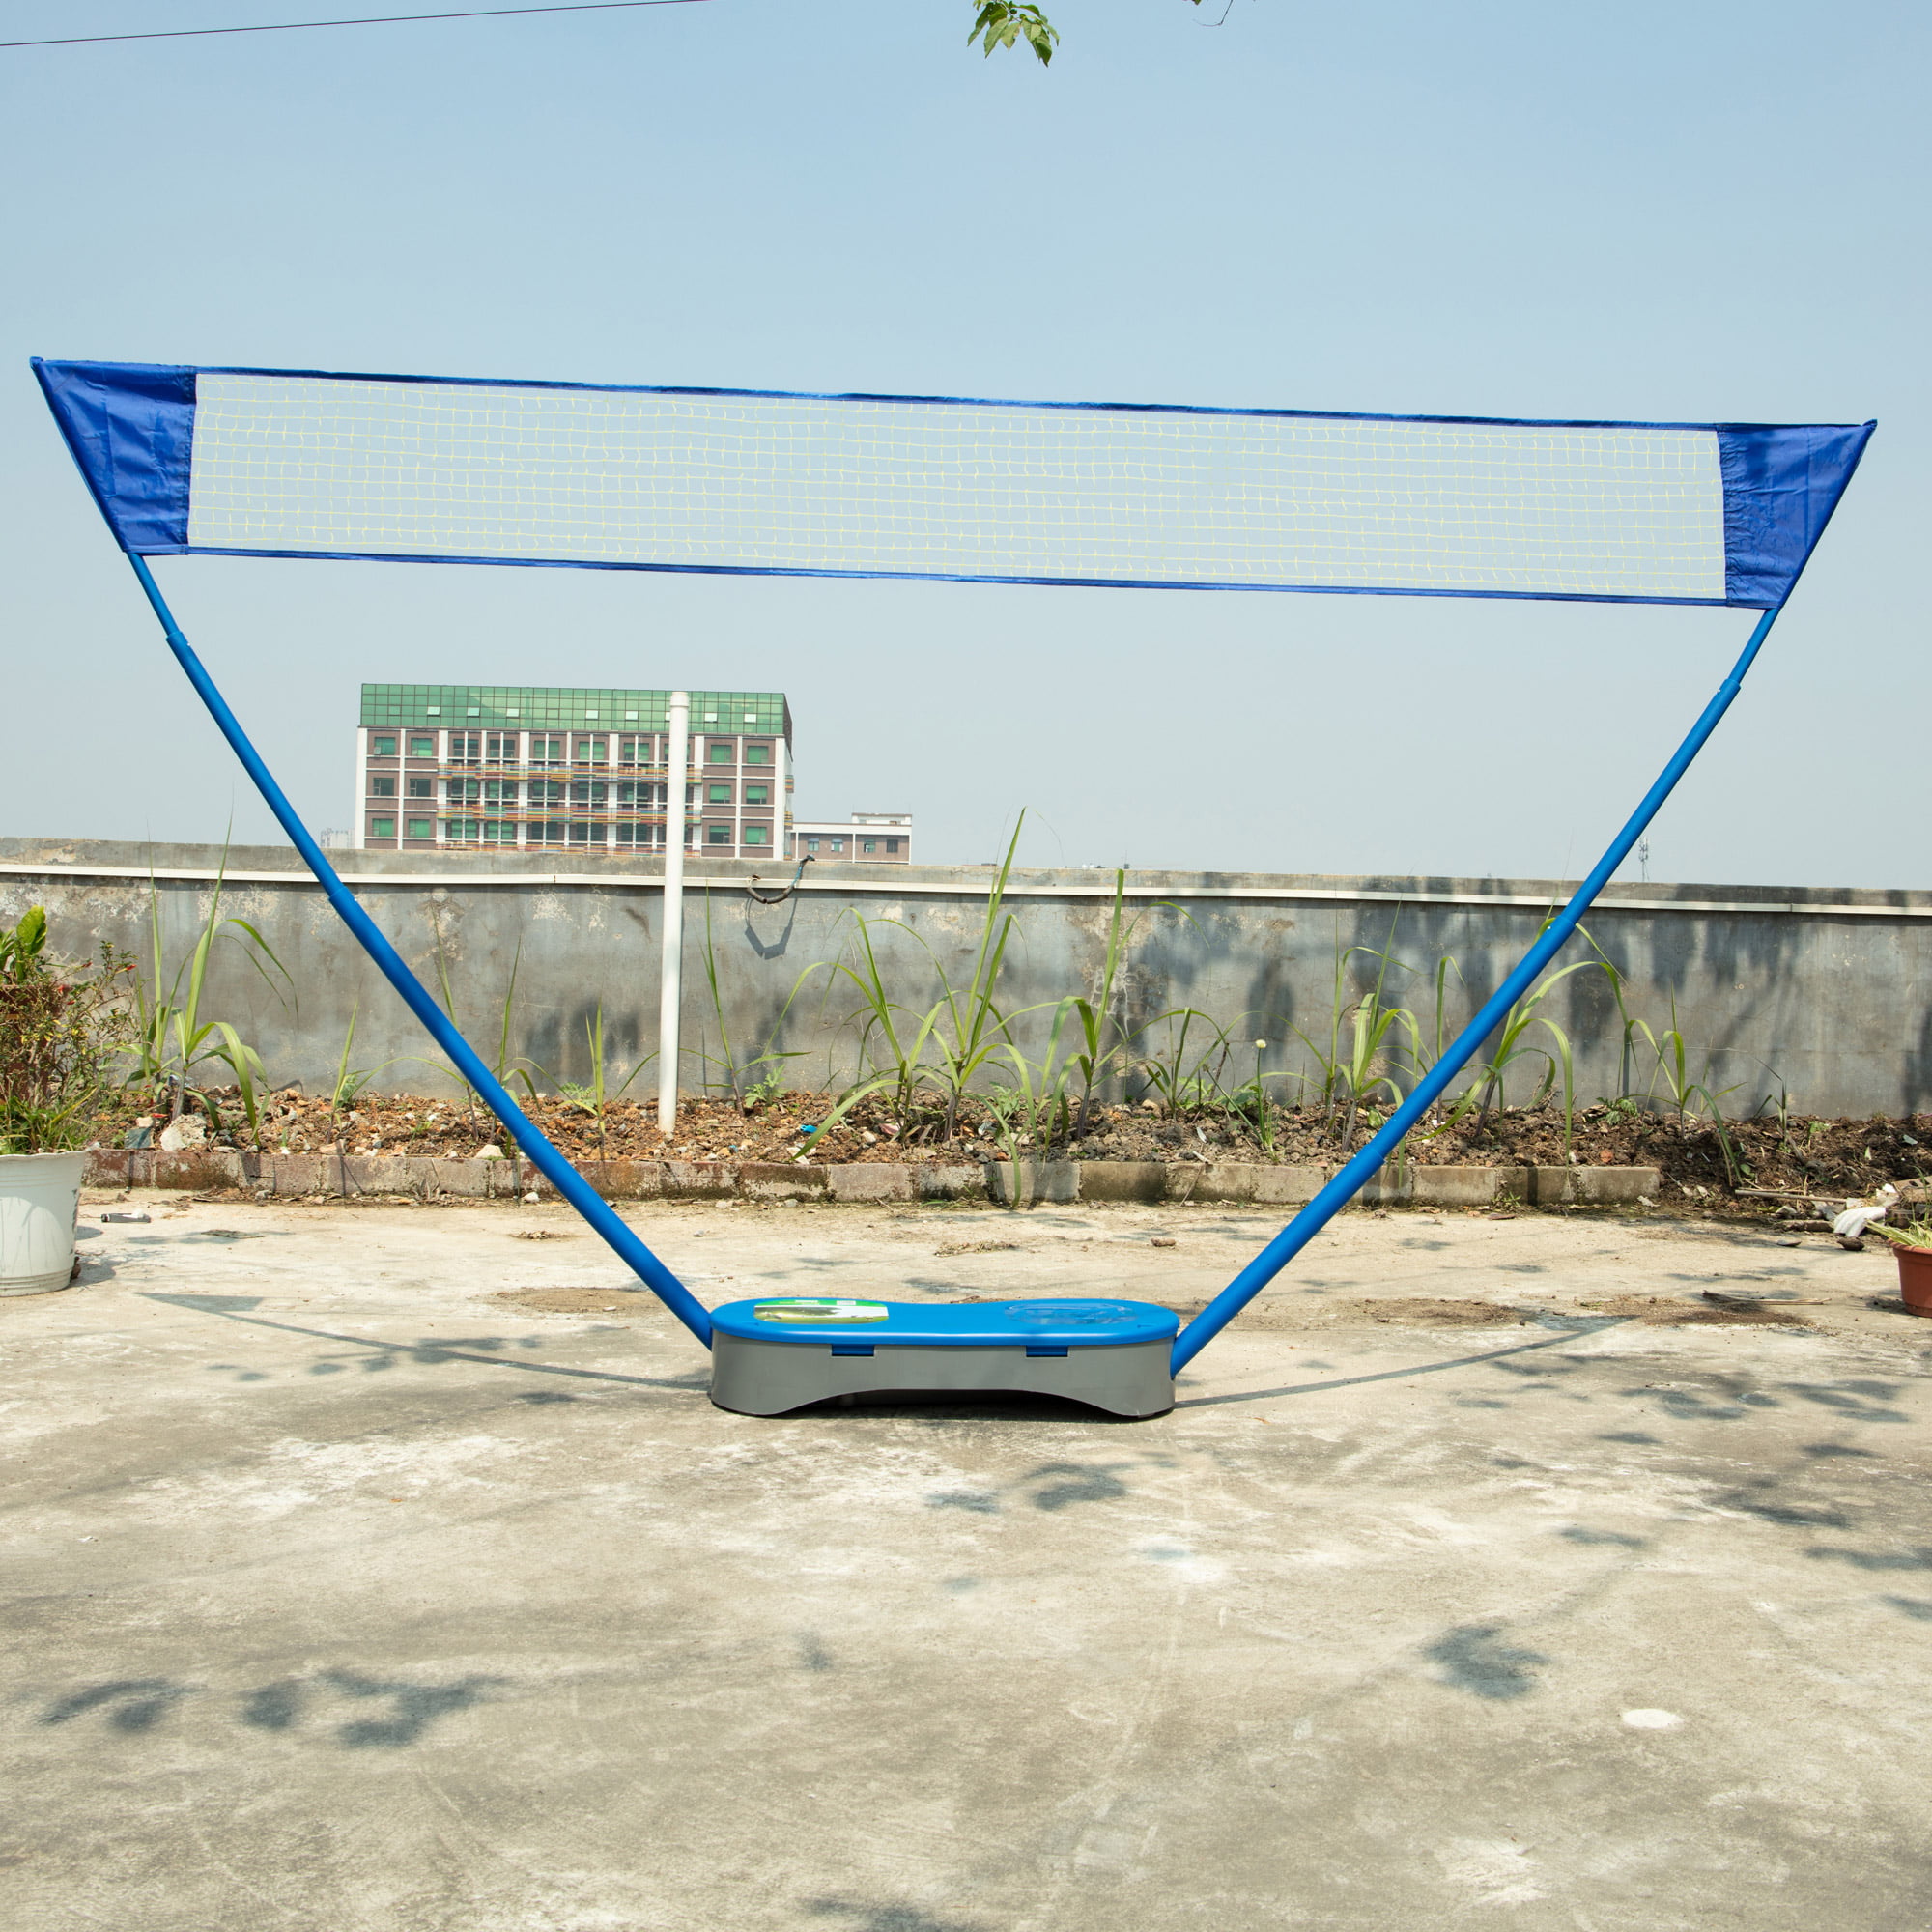 Rubyu Badminton Net Portable Volleyball Net Foldable Adjustable Shuttlecock Net Standard Size Volleyball Net with Storage Bag for Beach Game Indoor Match 